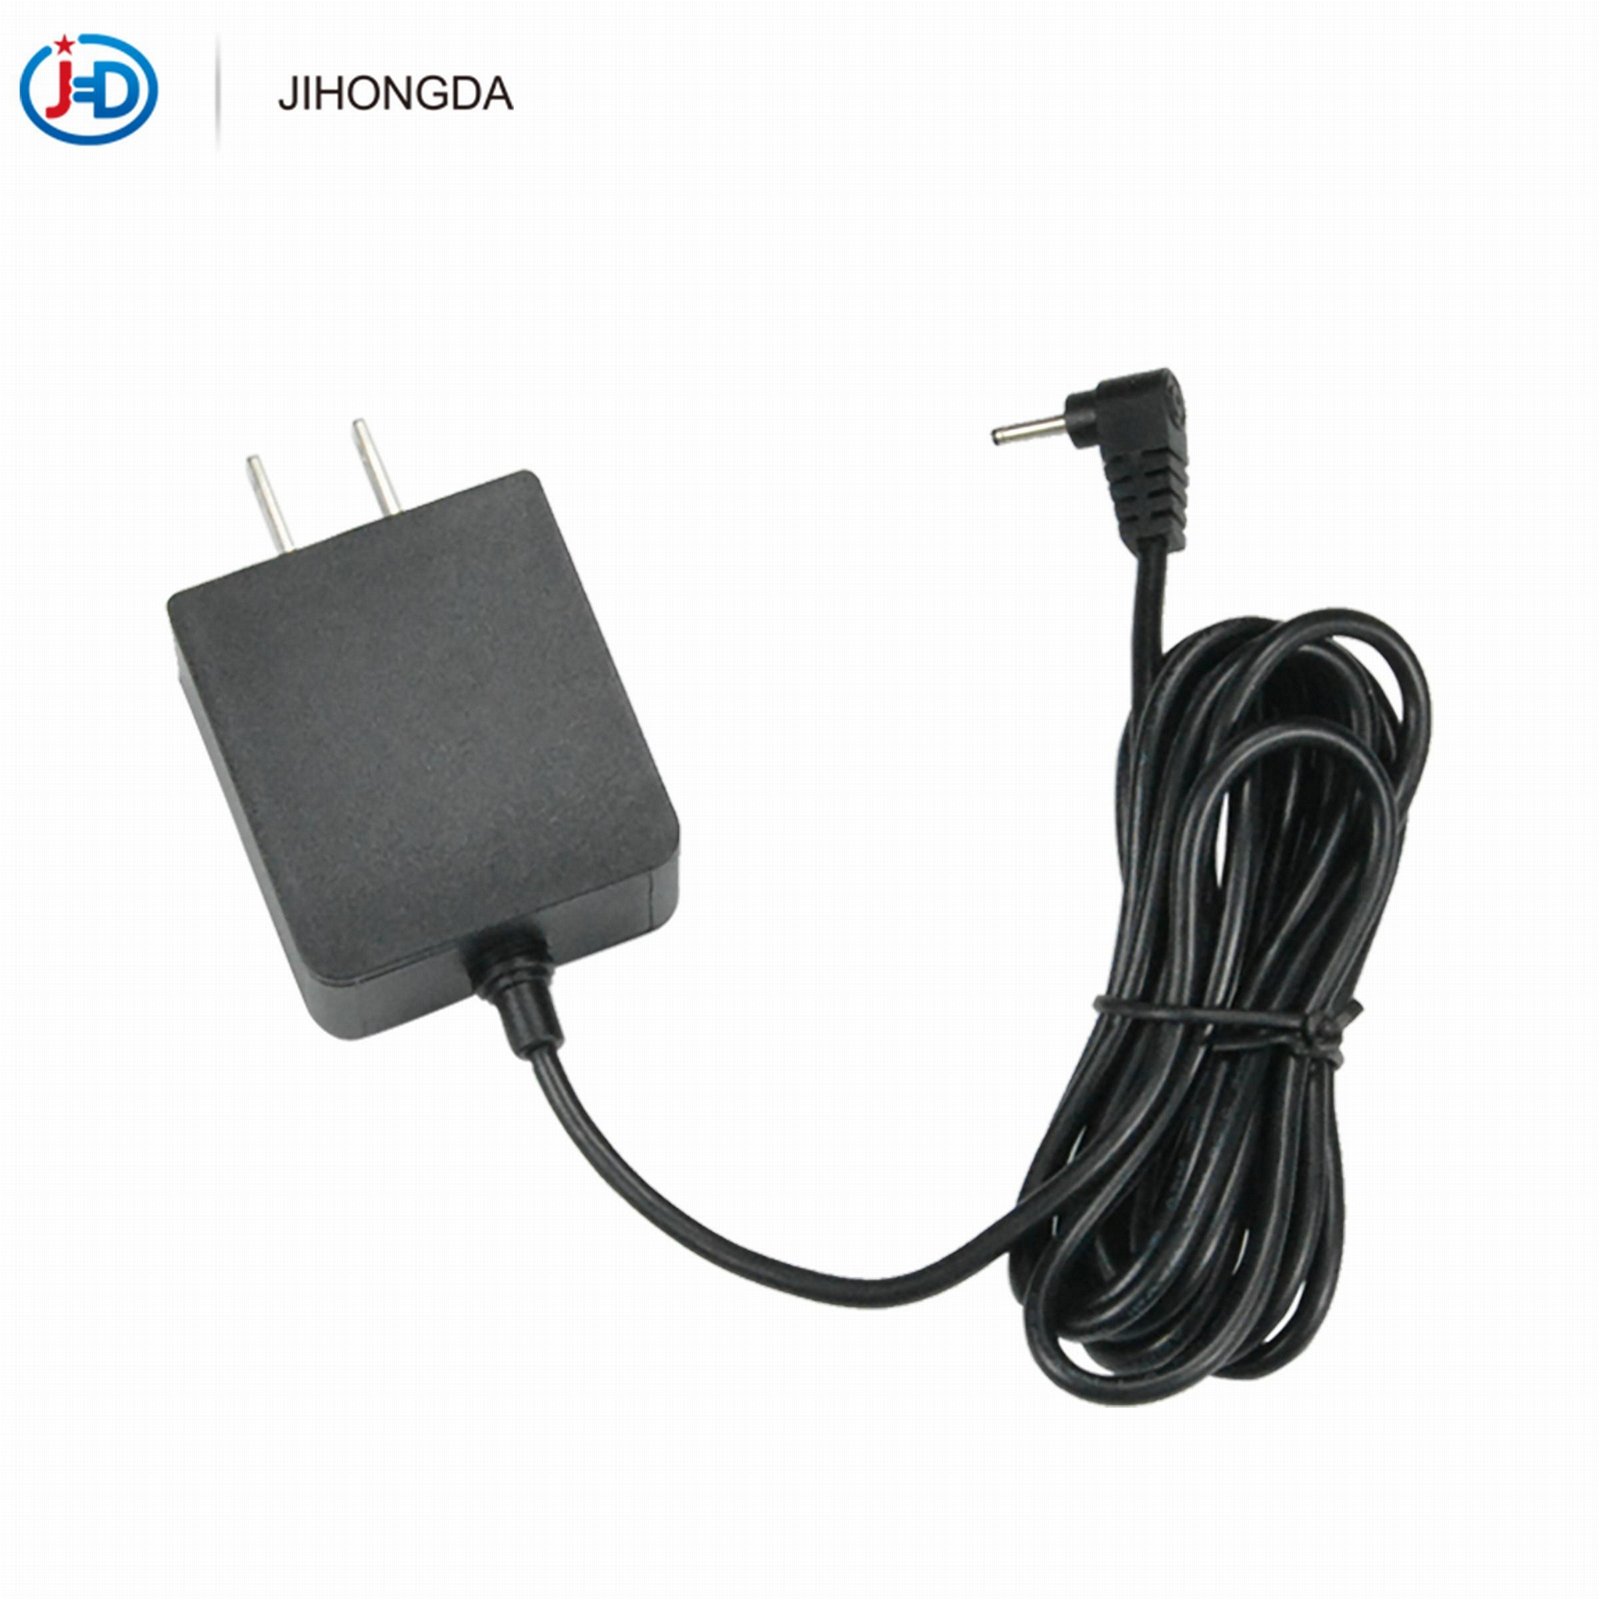 5V3A Switching Power Adapter with UL PSE certificate 3